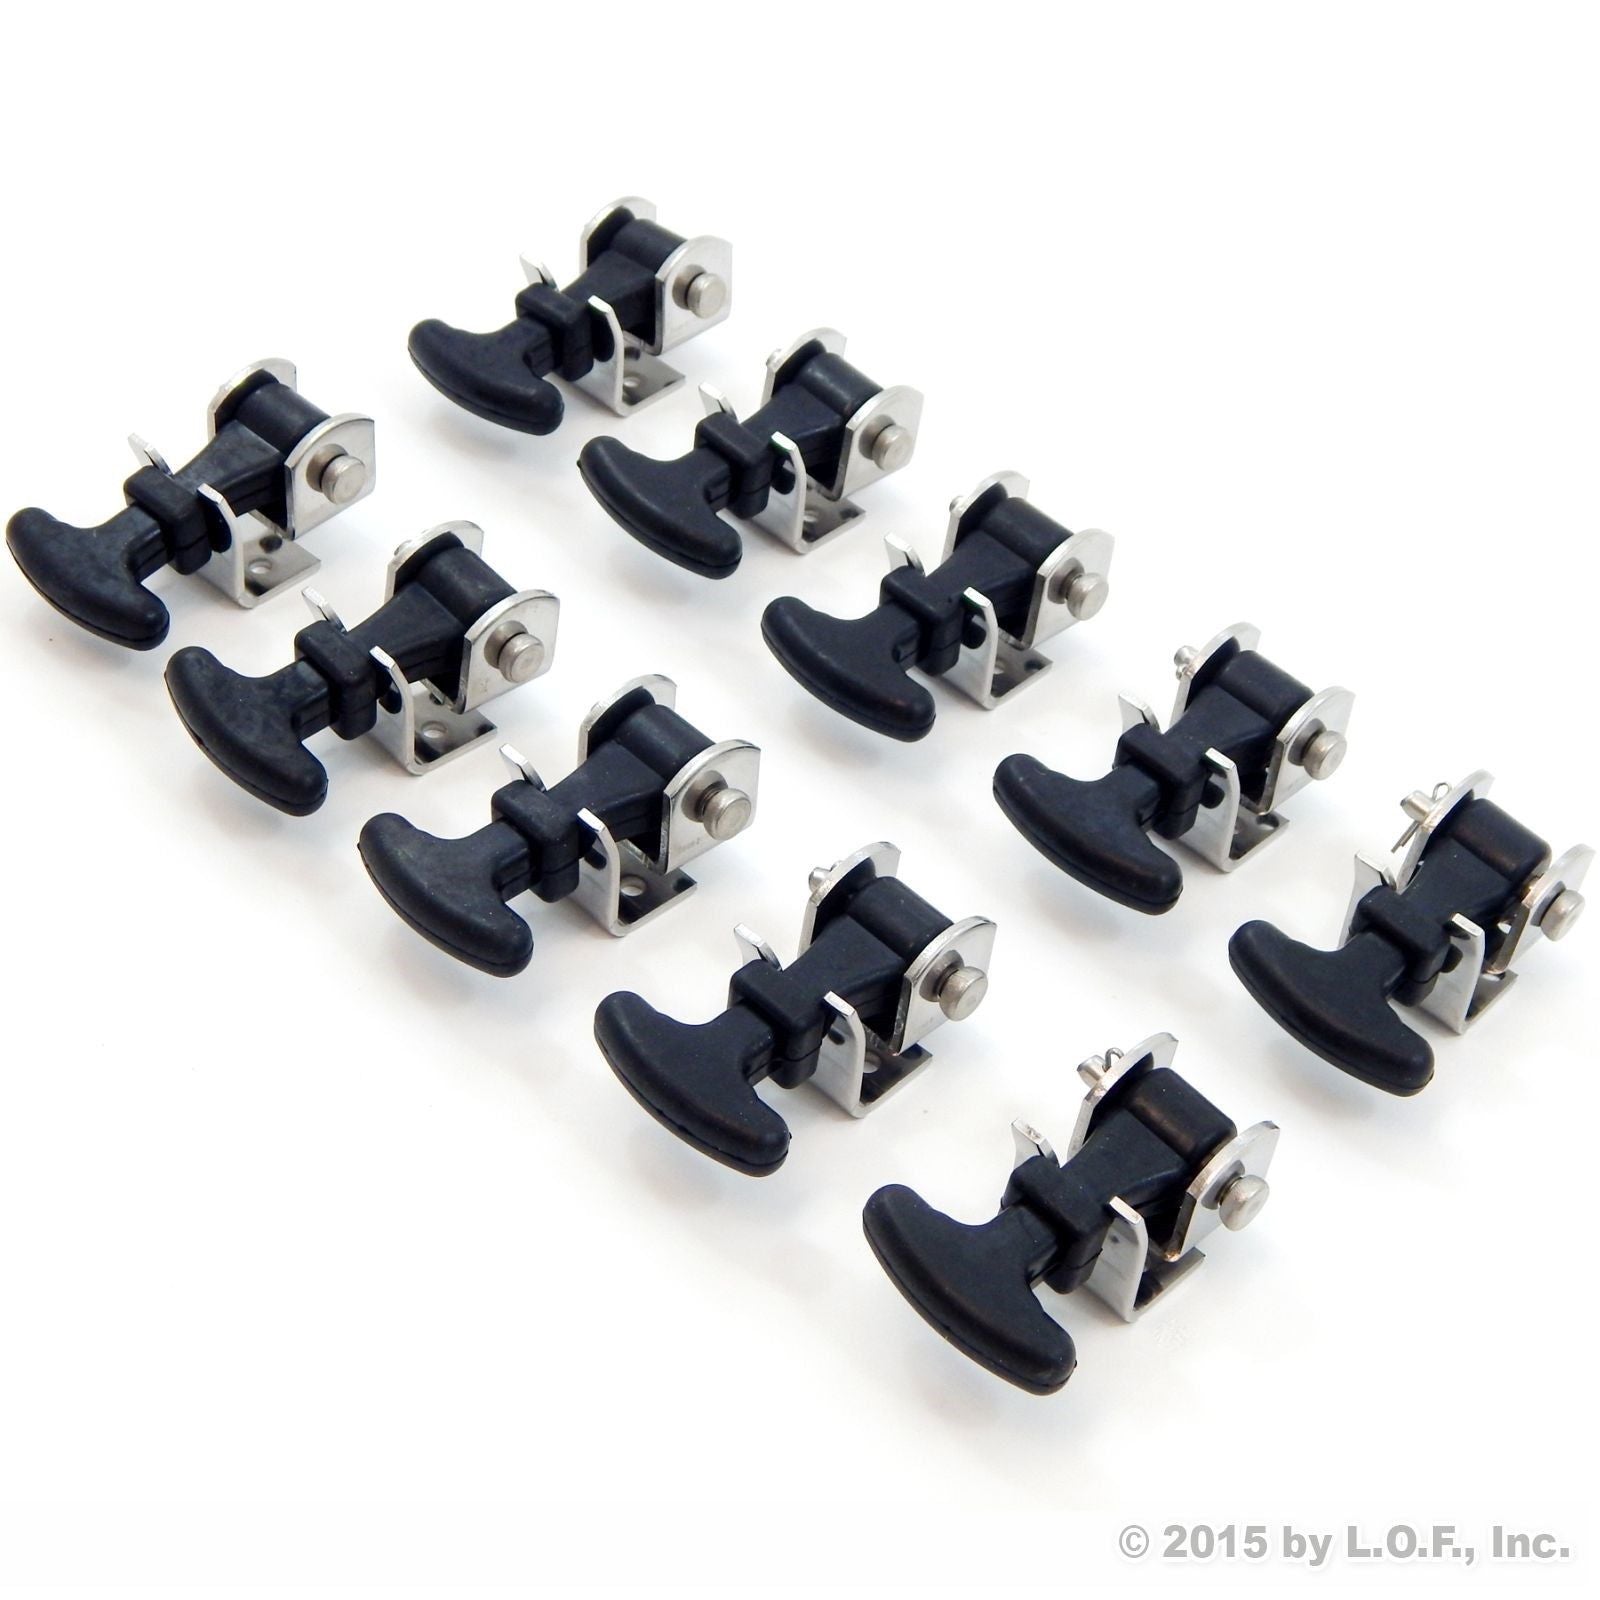 10 Pack Rubber Hood Catch Hold-Down Kit 2.5 Inch Mini Easy Grip Draw Latch Stainless Steel Brackets and Hardware Replacement 2 1/2 Compartment Luggage Container Battery Box Tiedown LP Bottle Cover